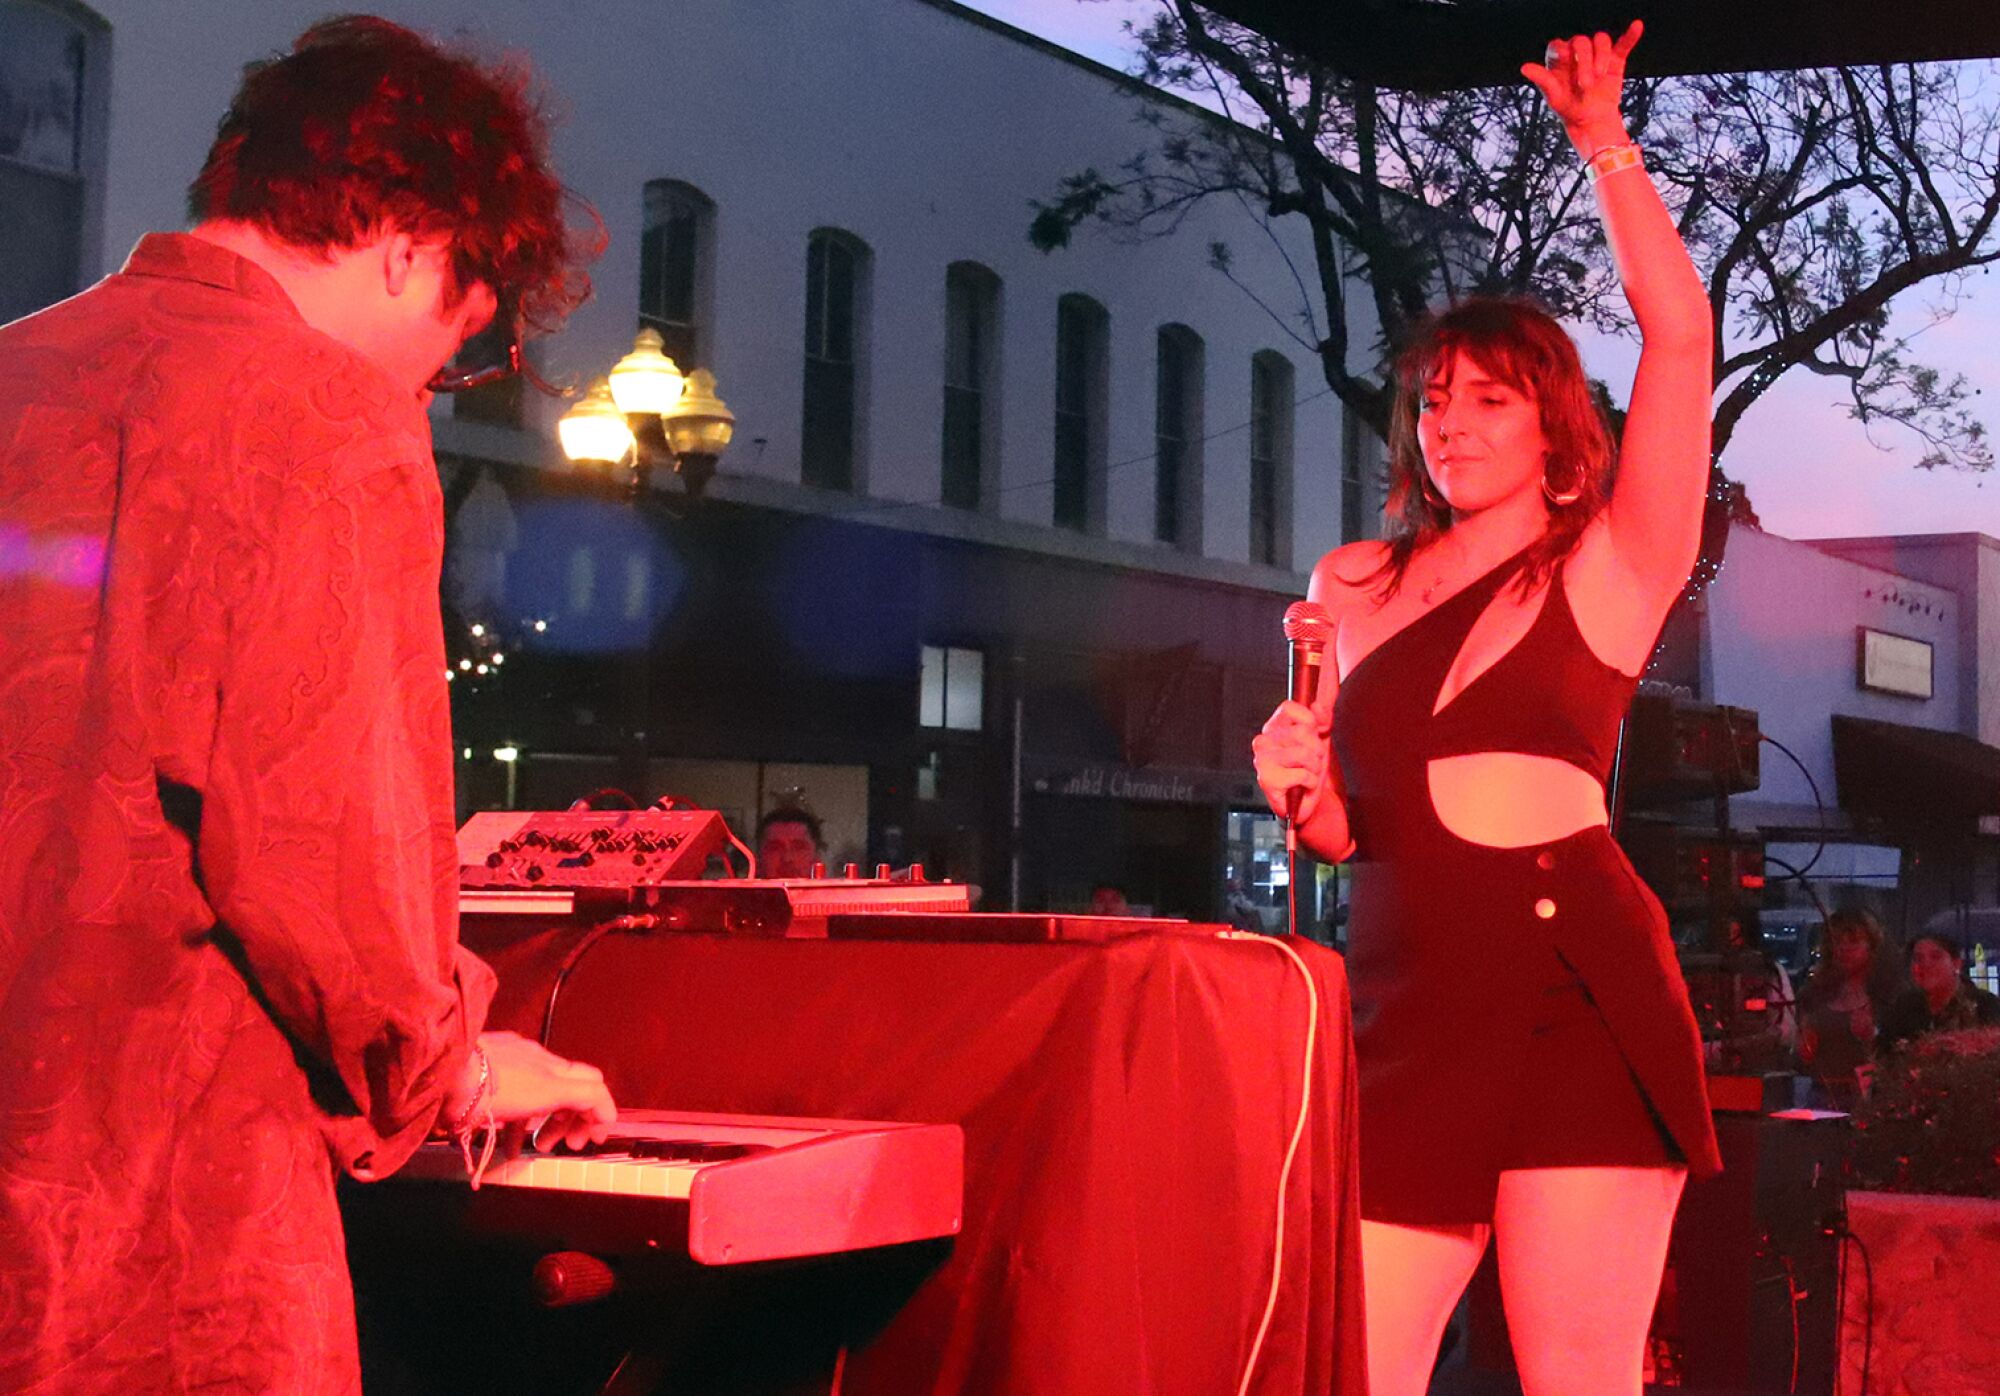 A woman dancing and a man playing keyboard.